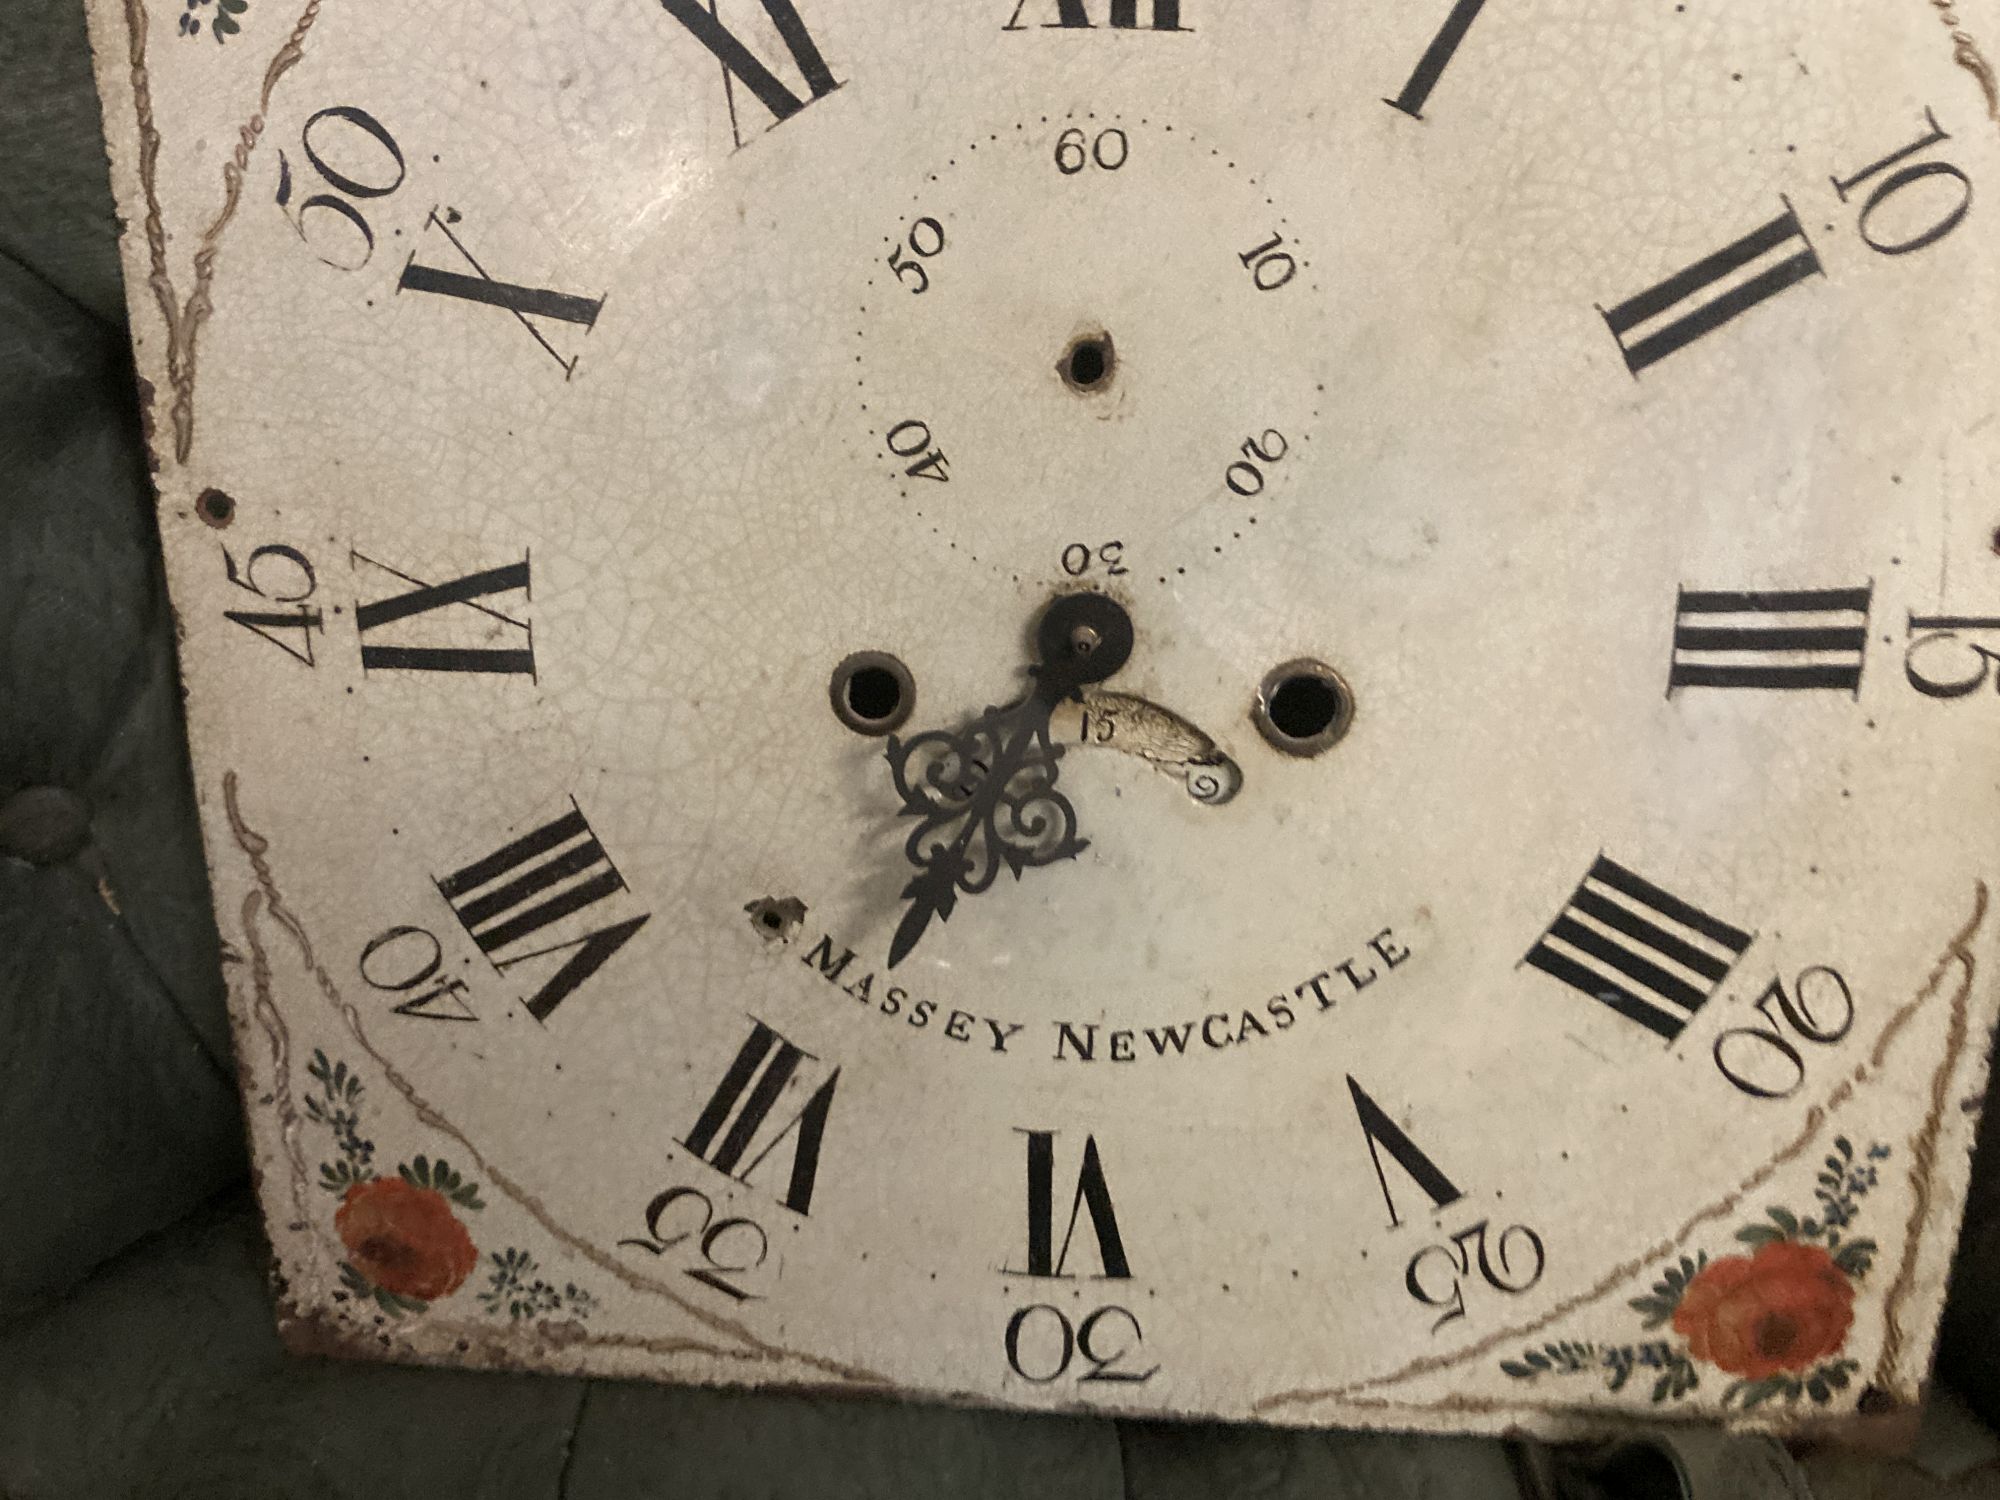 An early 19th century painted longcase clock dial, marked Massey, Newcastle, width 36cm height 50cm